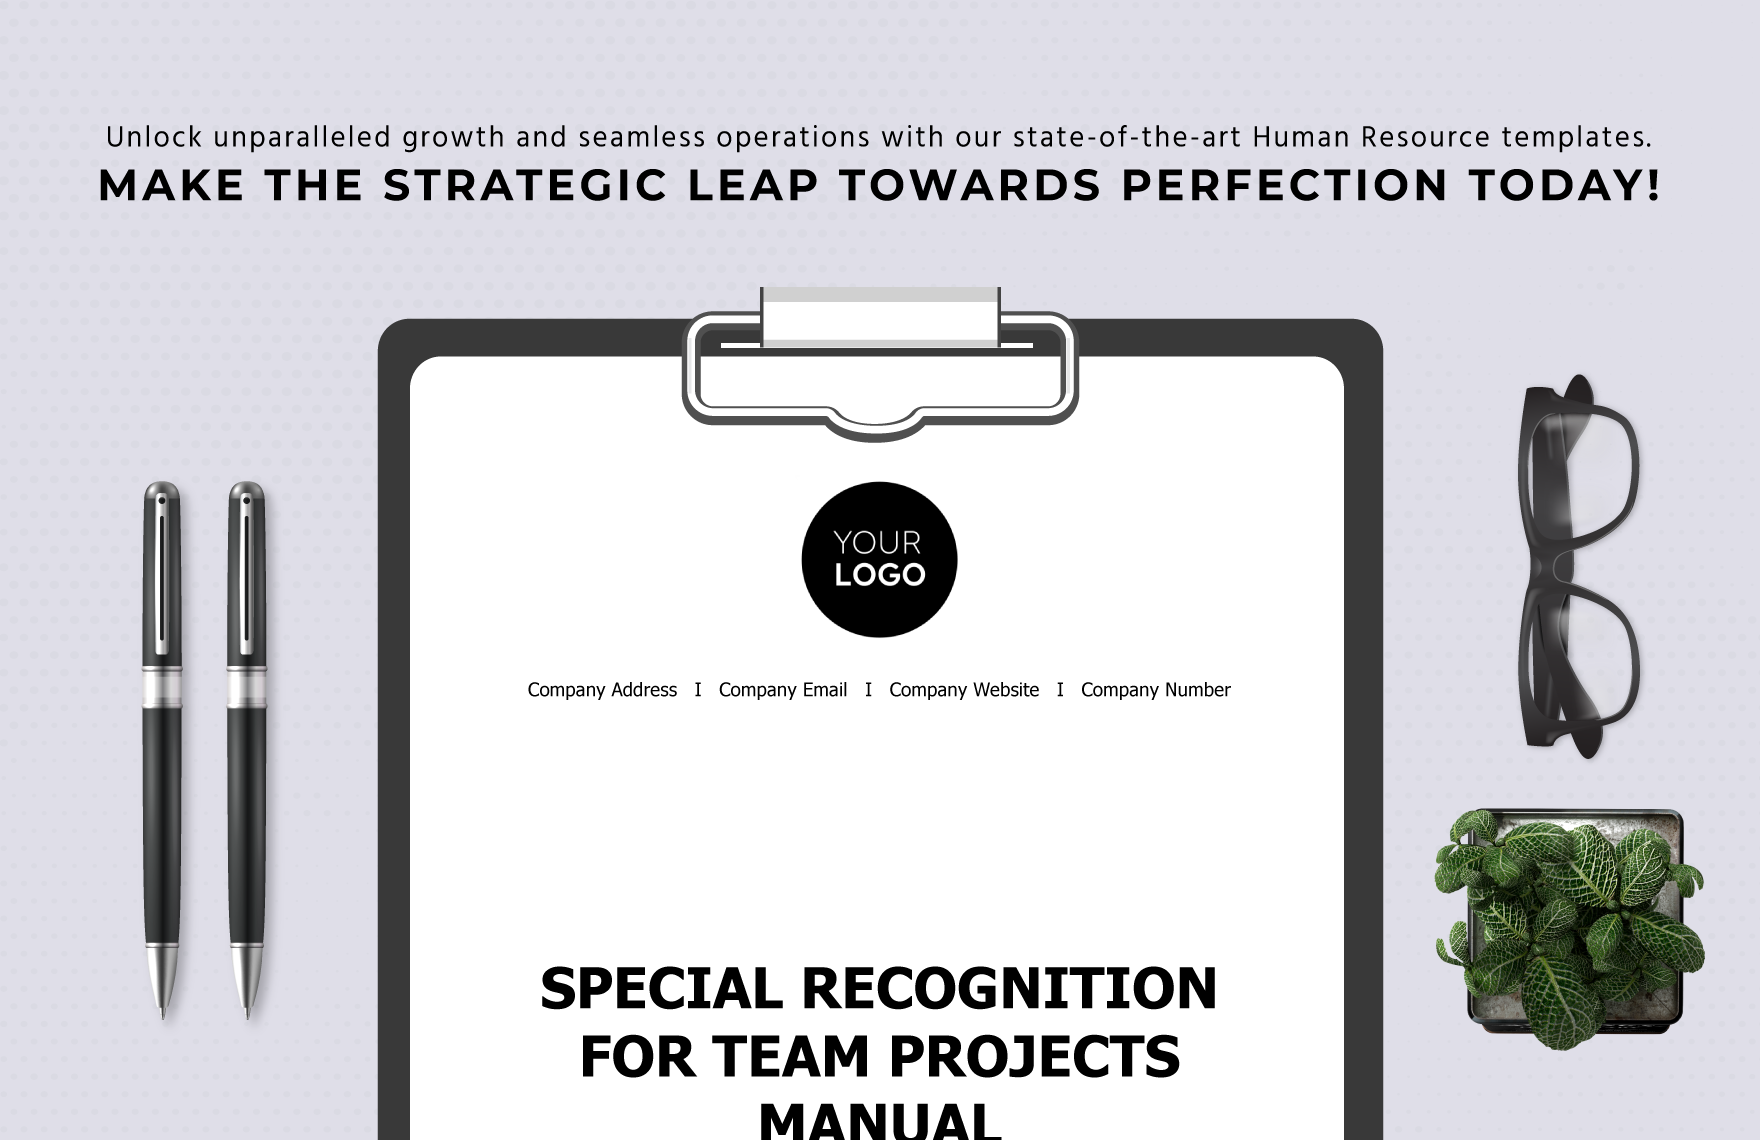 Special Recognition for Team Projects Manual HR Template